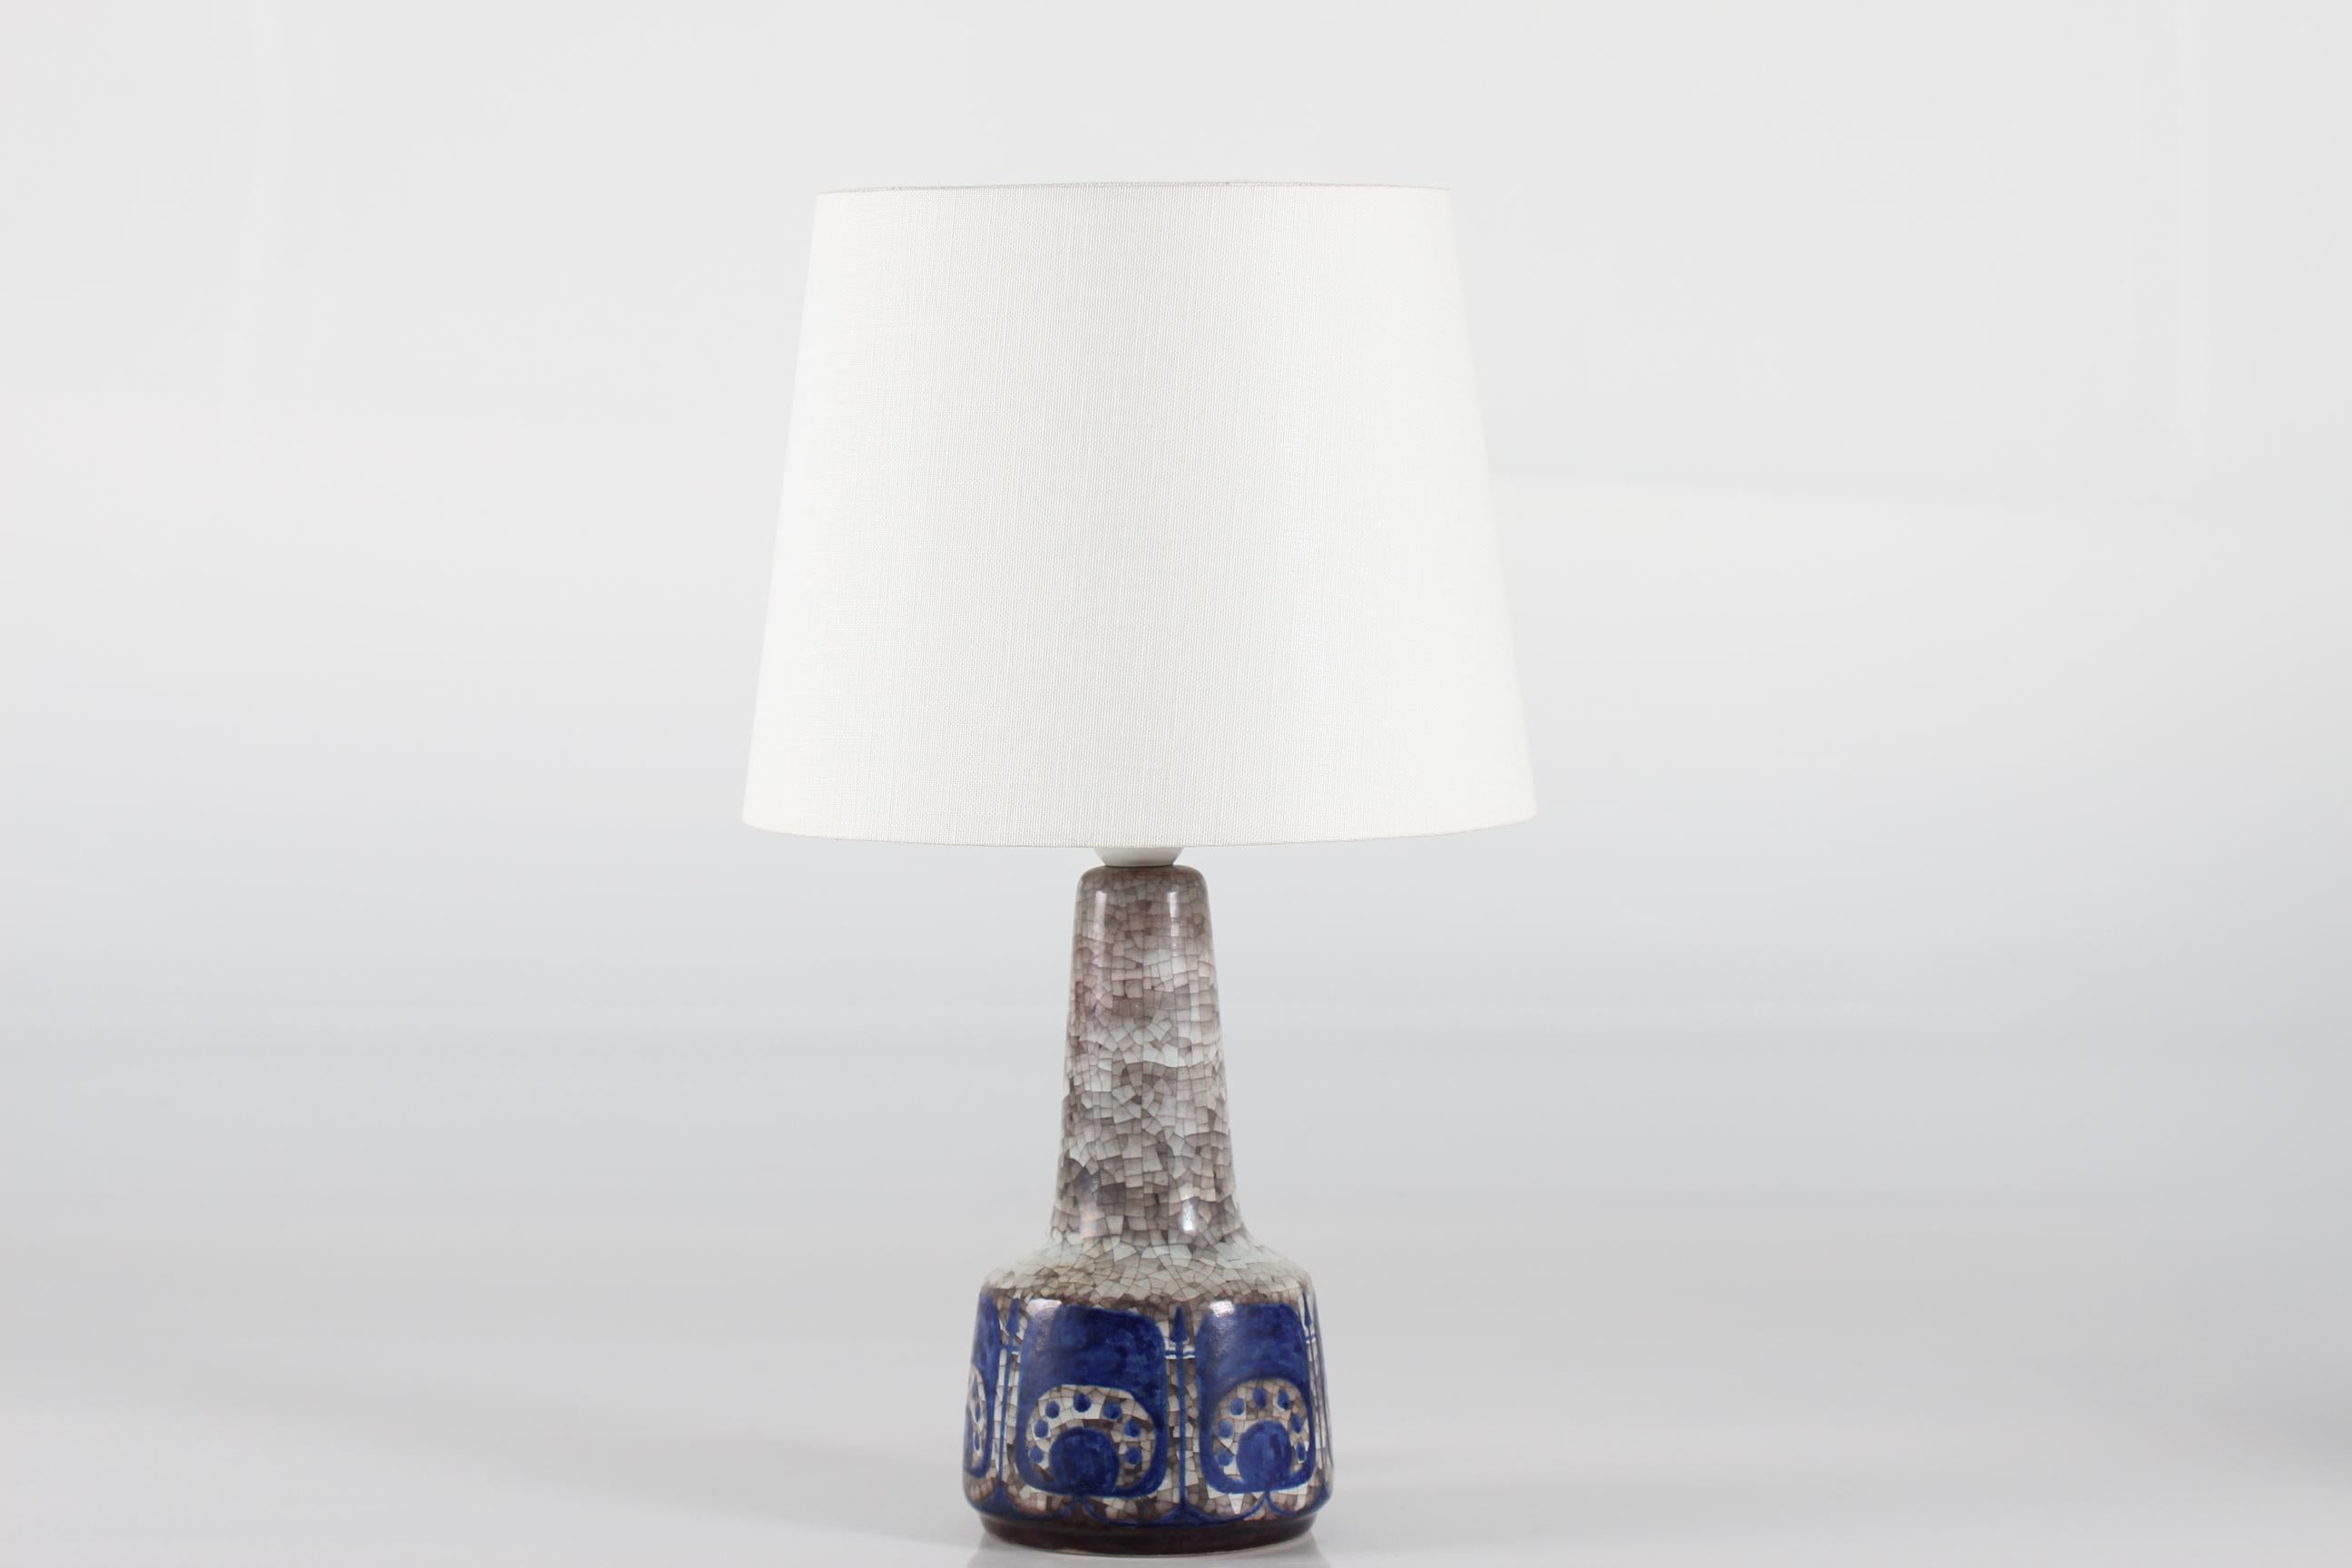 Midcentury Danish table lamp by Marianne Starck for Michael Andersen & Søn.
The lamp is decorated with the Persia glaze in blue and gray featuring an abstract floral decor with reminscences of Islamic art.
Made circa 1960s. 

Included is a new